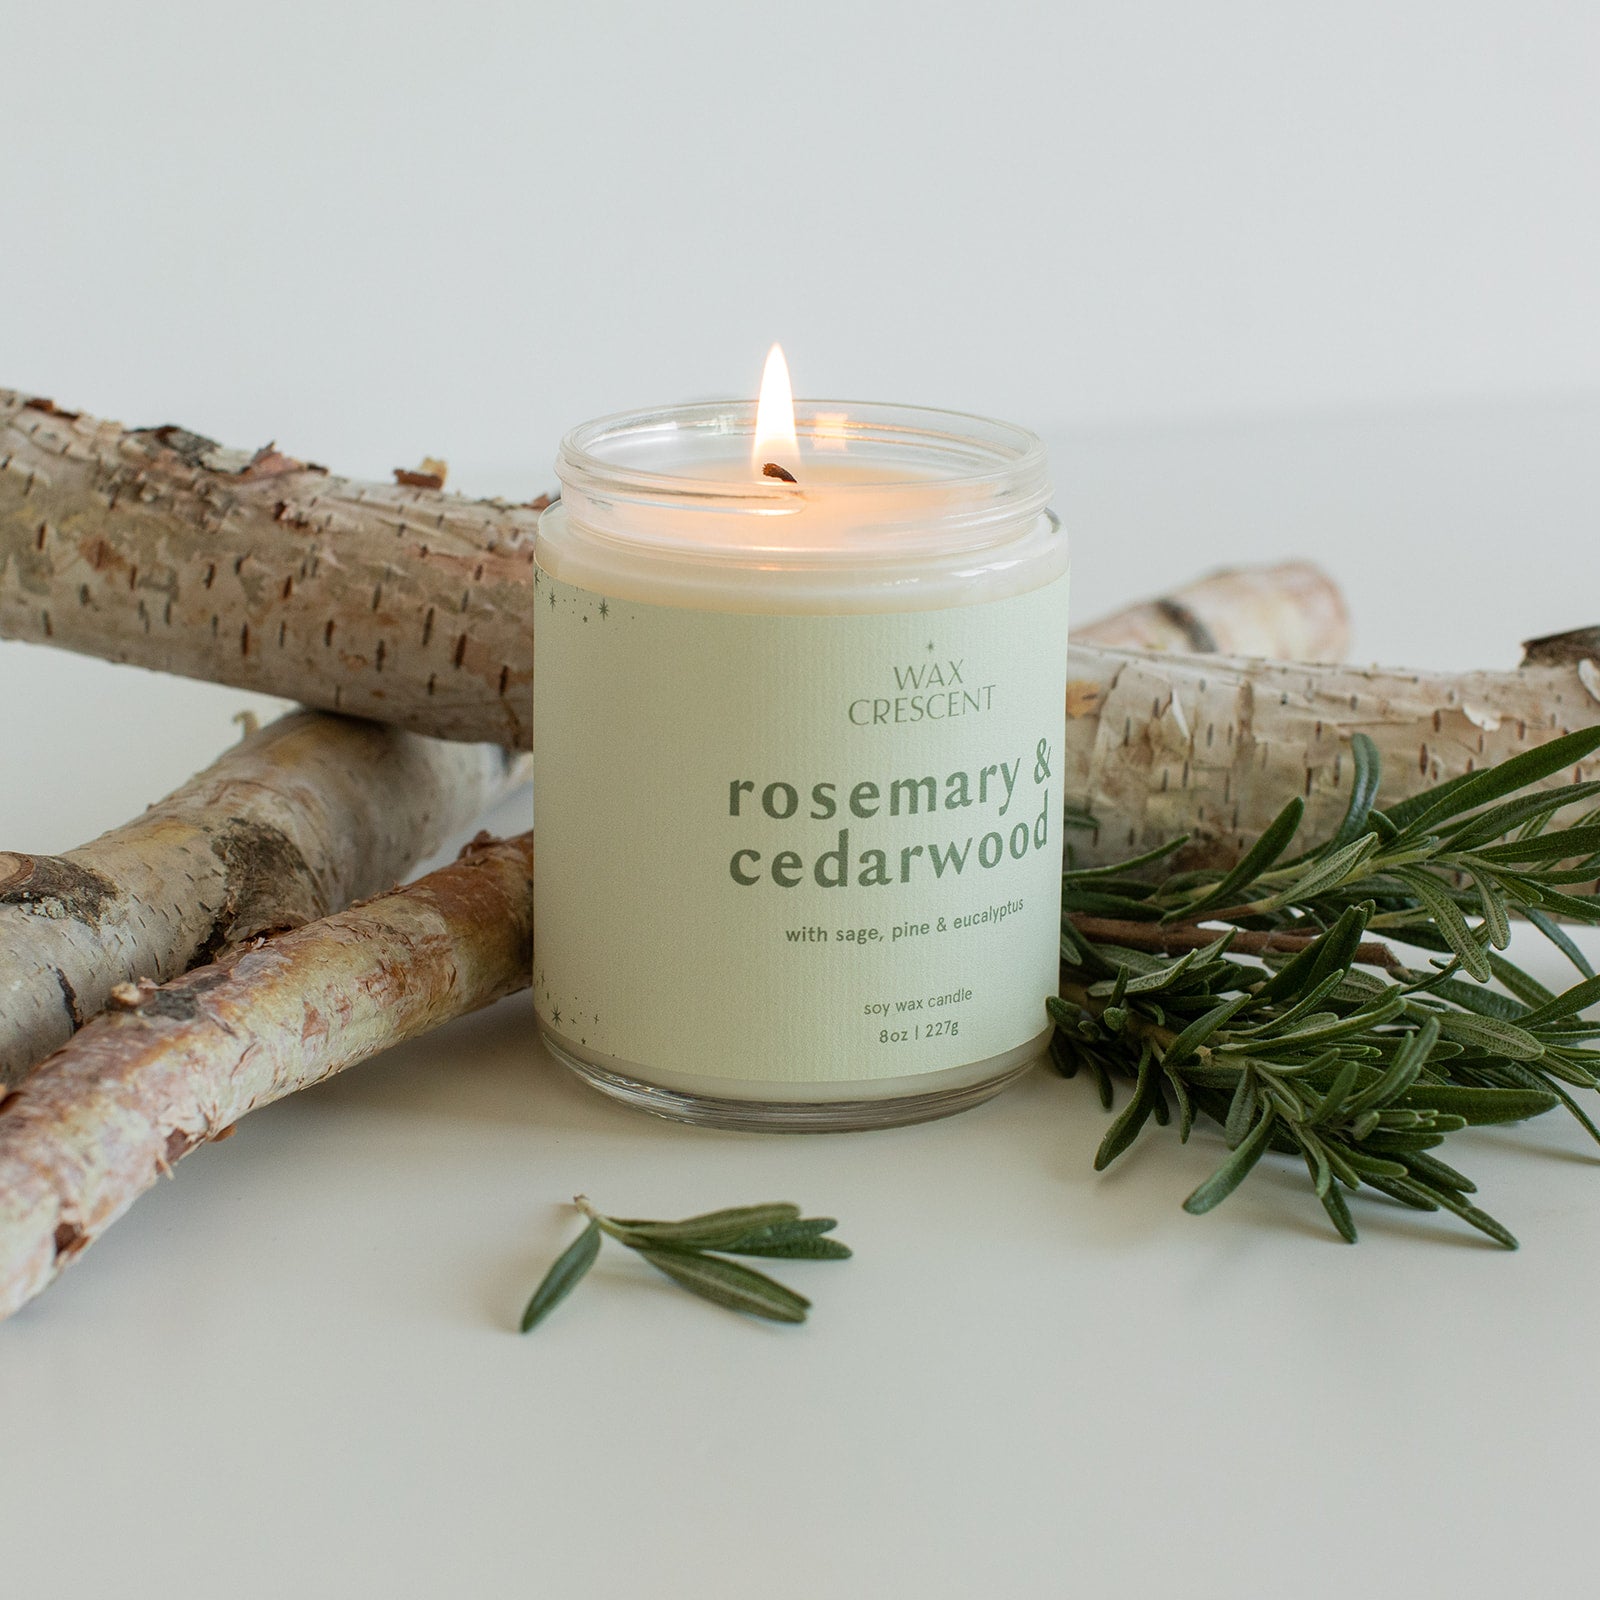 luxury soy wax candle that is hand-poured and nontoxic